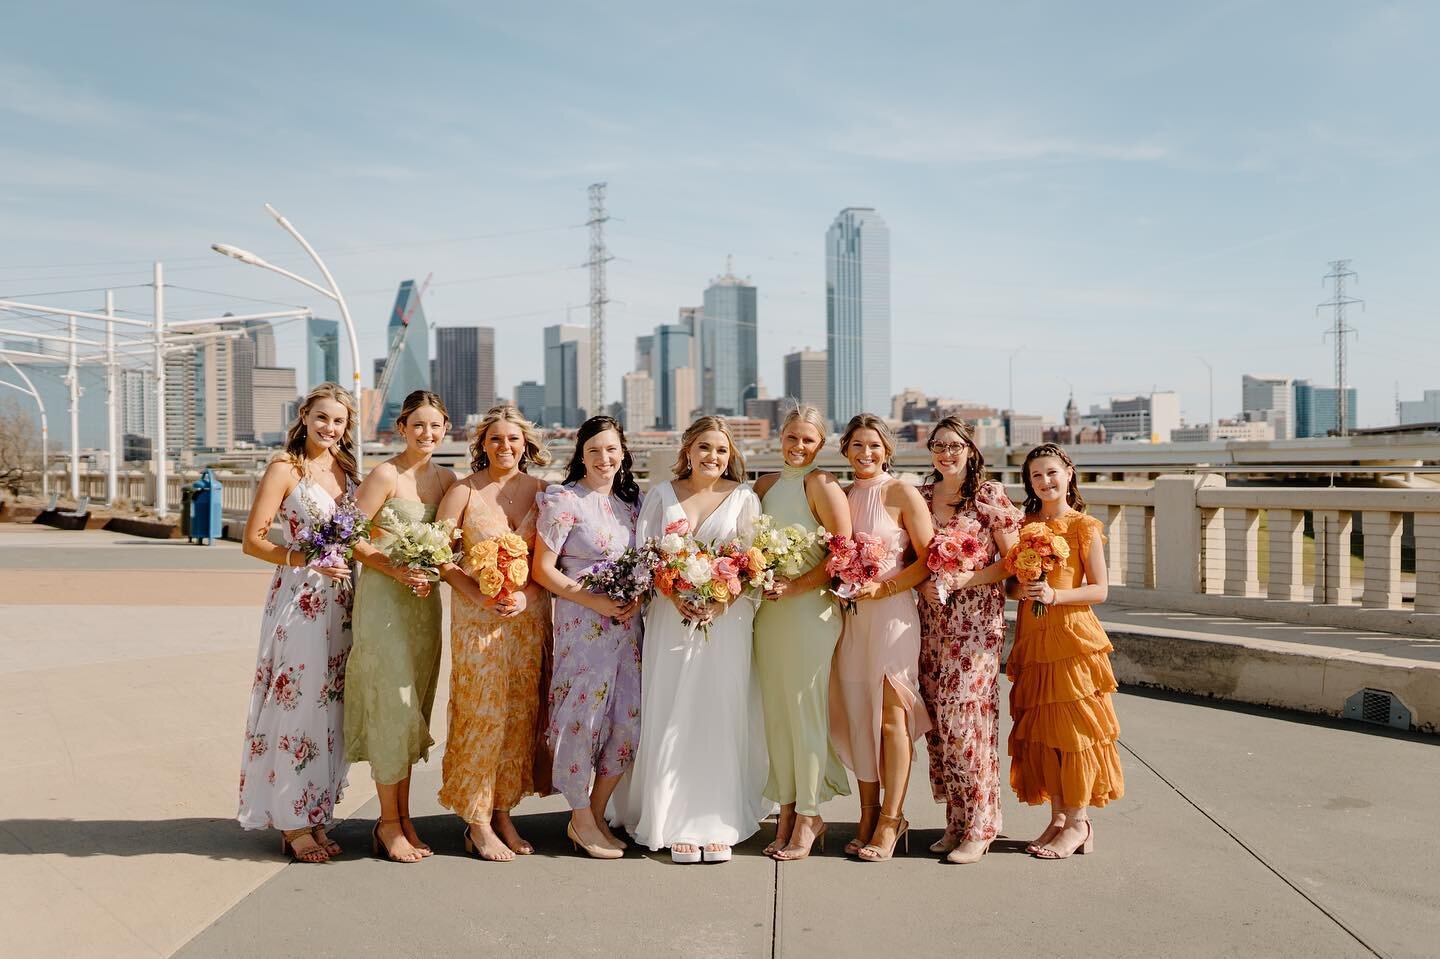 I am loving this vibrant color scheme so much! Even better the bridesmaids bouquets matched their dress colors! 😍

Tags for insta: 
 Bride: @graceschimmoeller
Groom: @dillonschimmoeller
Photo: @vibycreative
Video: @vibycreative
Coordinator: @somethi